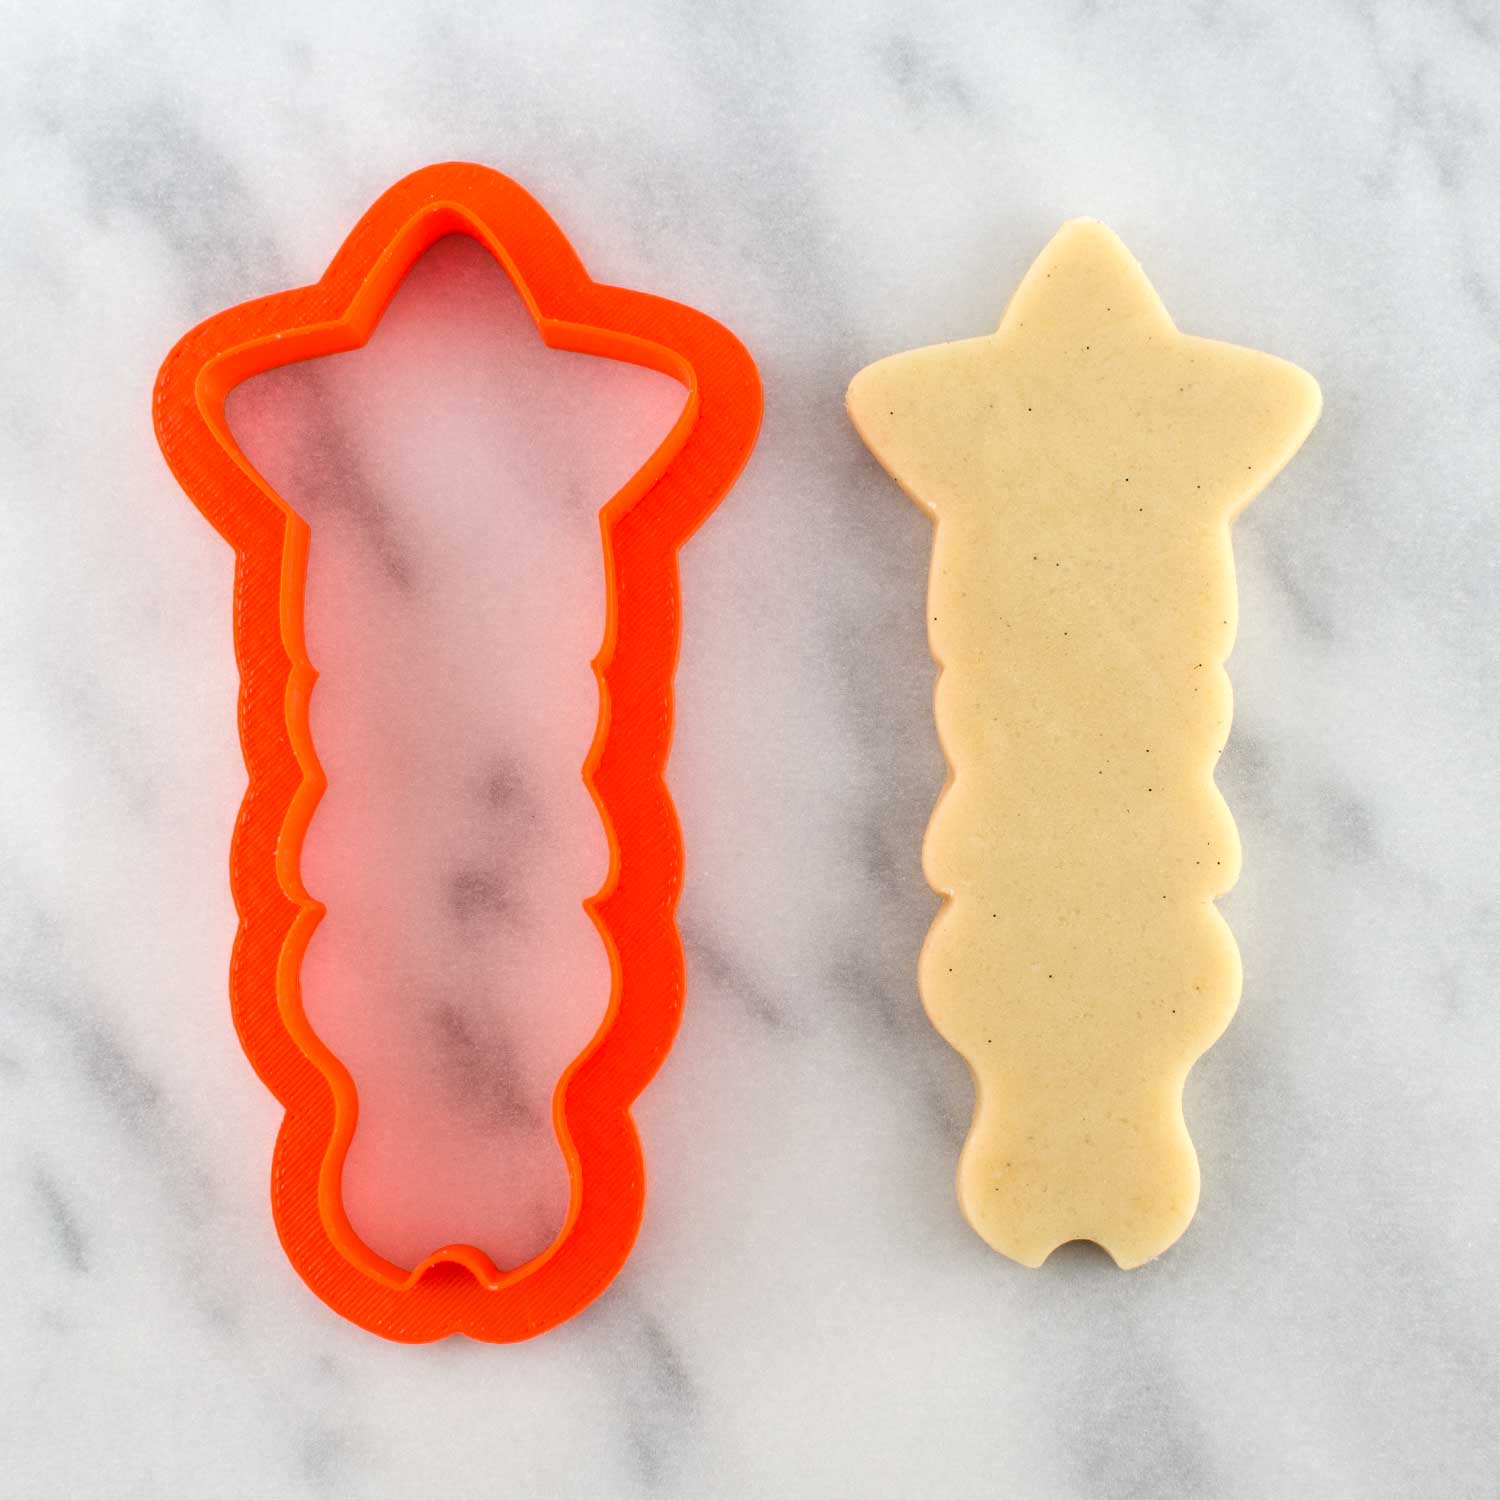 Cloud - 1 Cookie Cutter – SweetShapes.Co